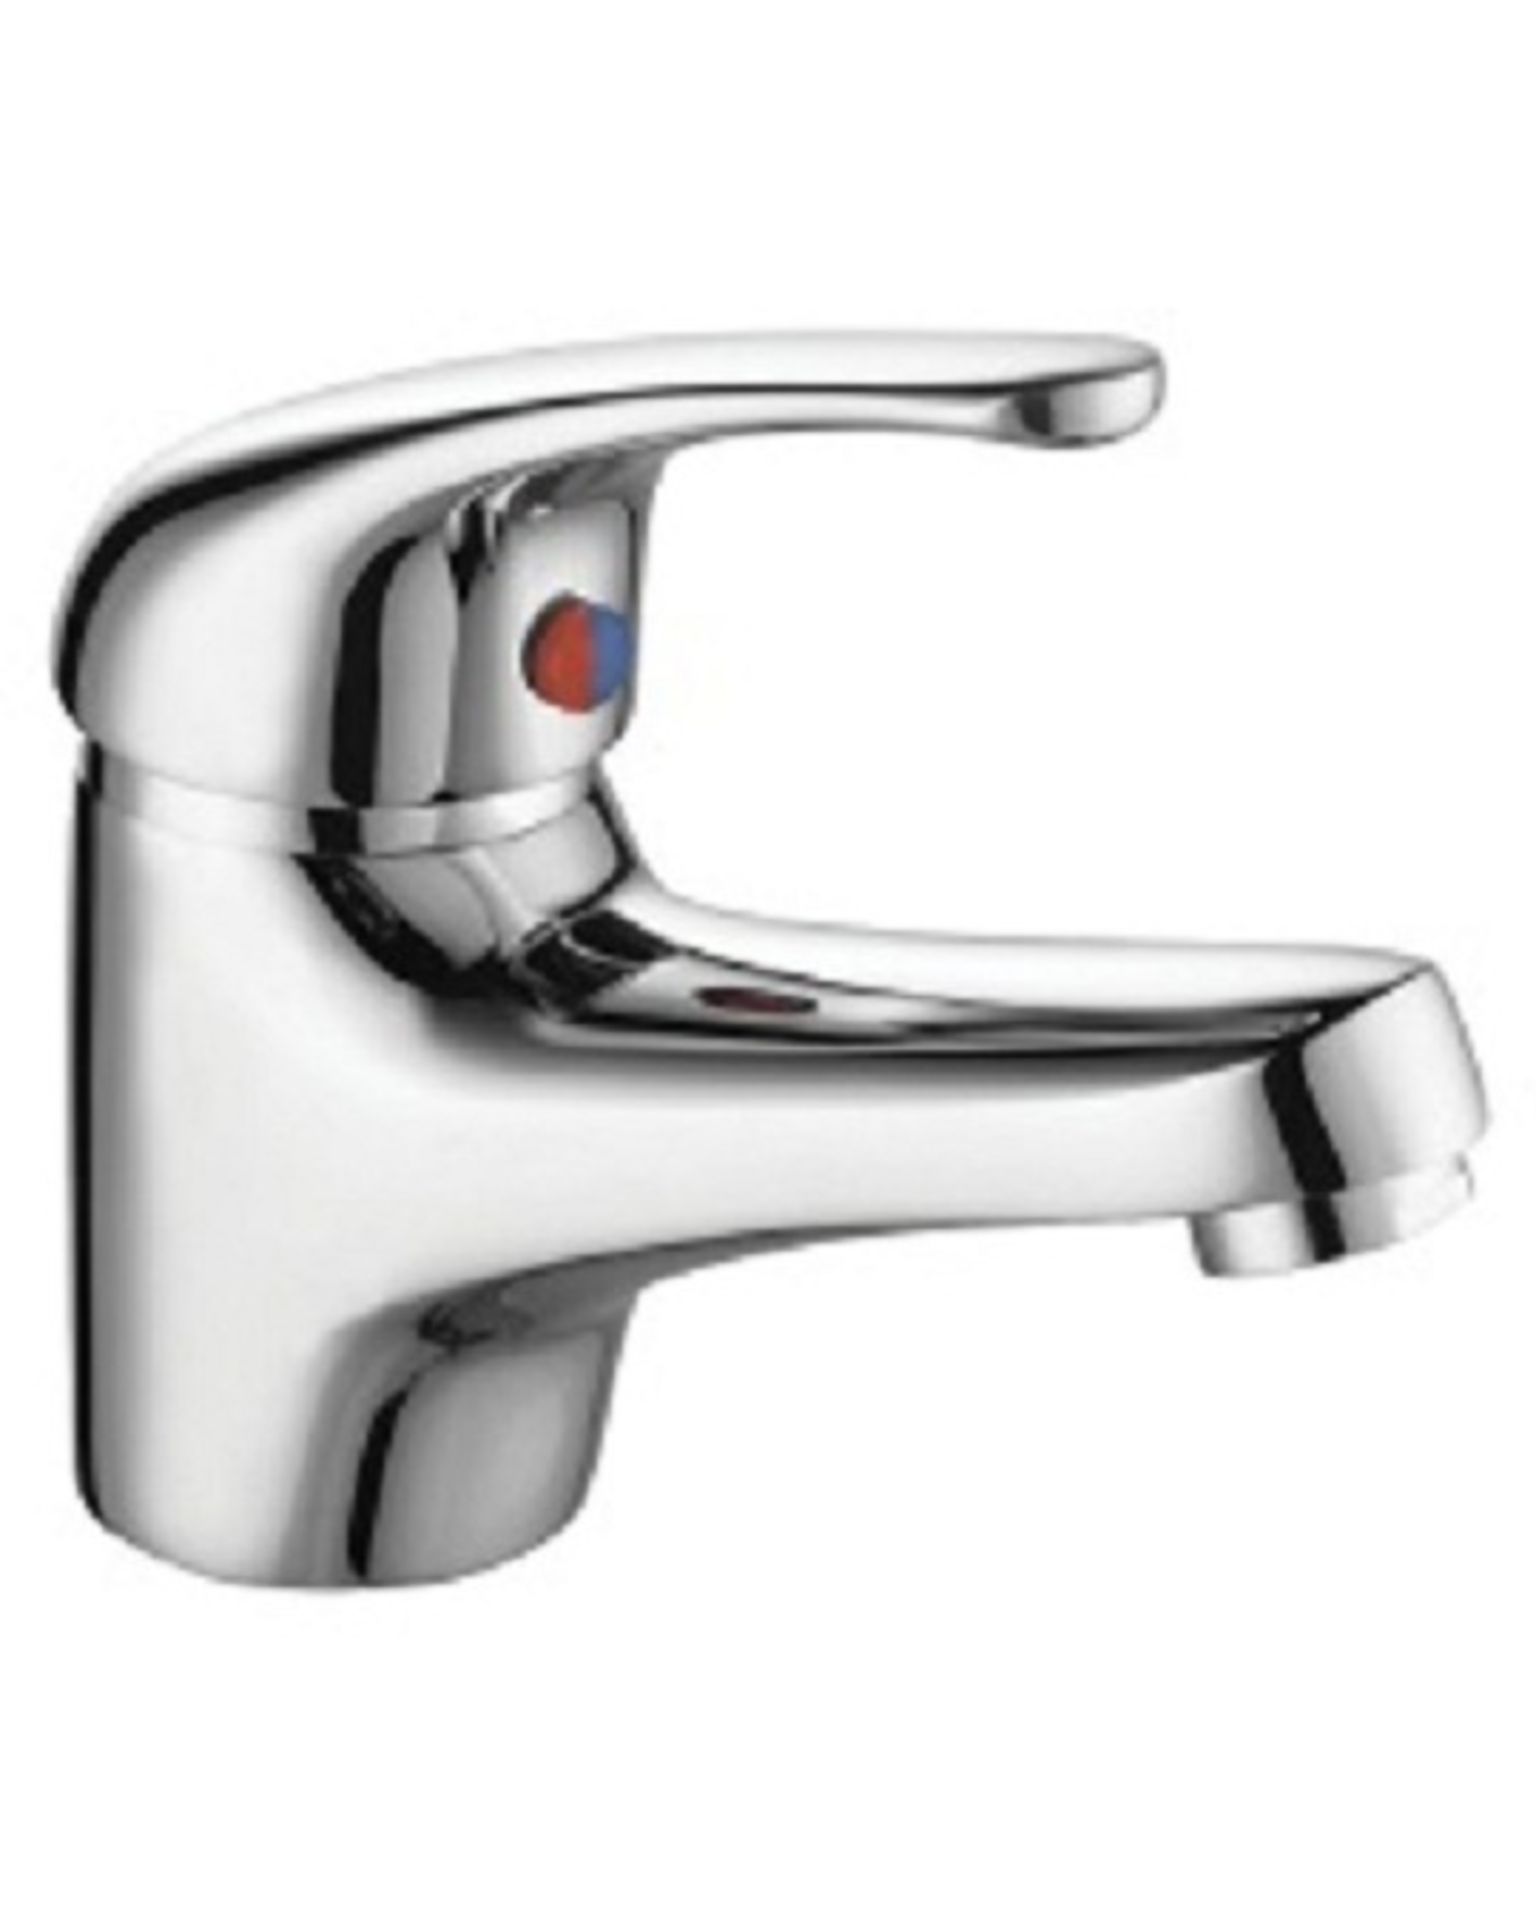 Chrome mixer tap with slotted waste